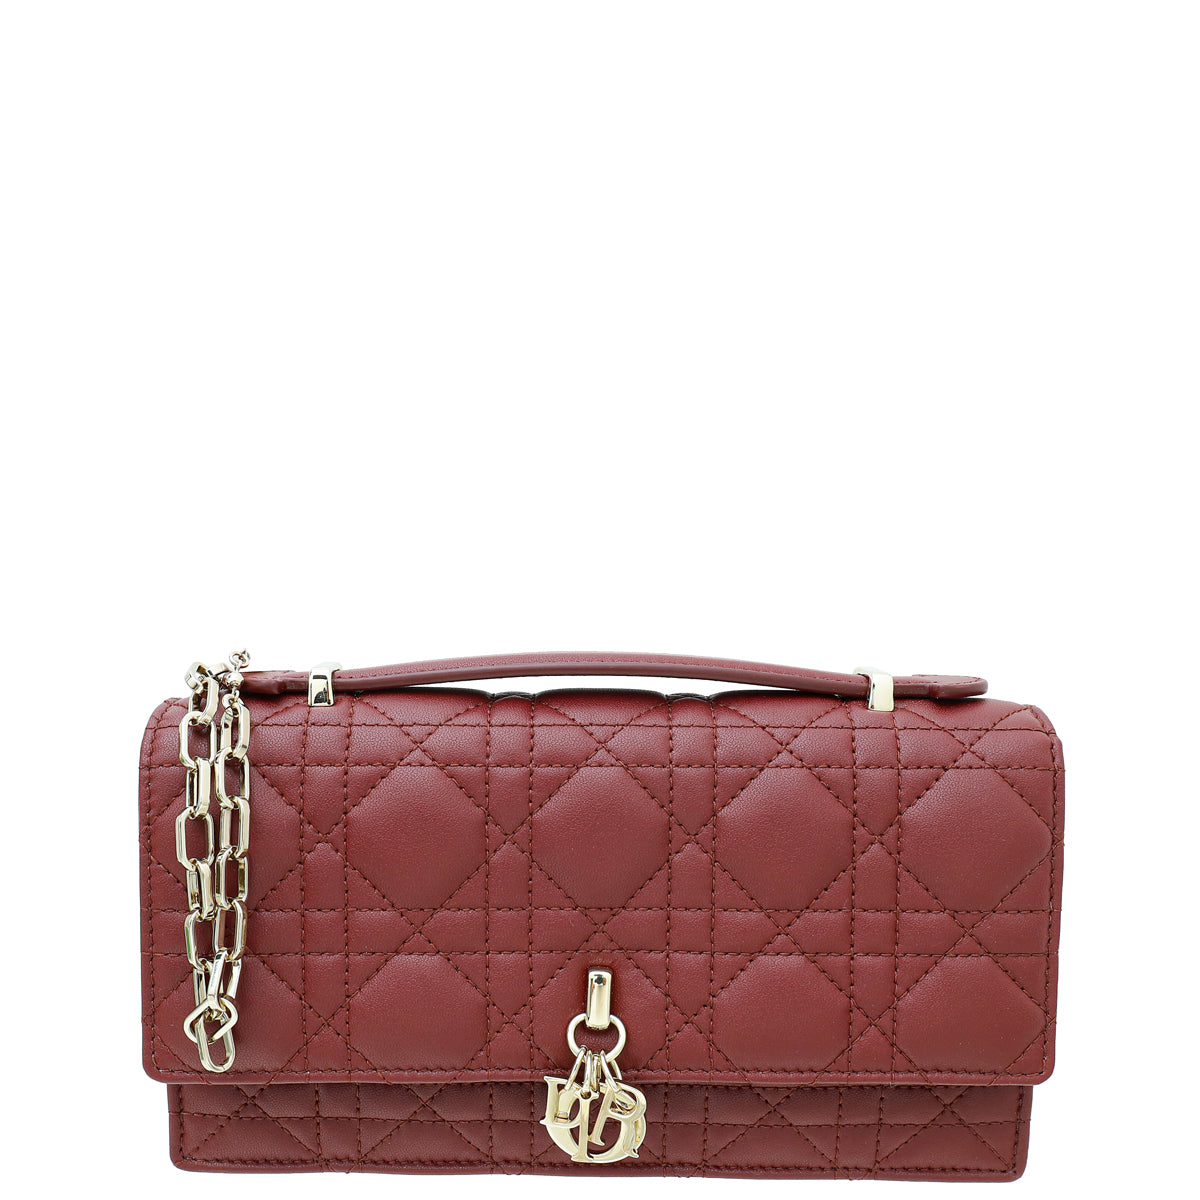 Christian Dior Burgundy My Dior Quilted Mini Bag